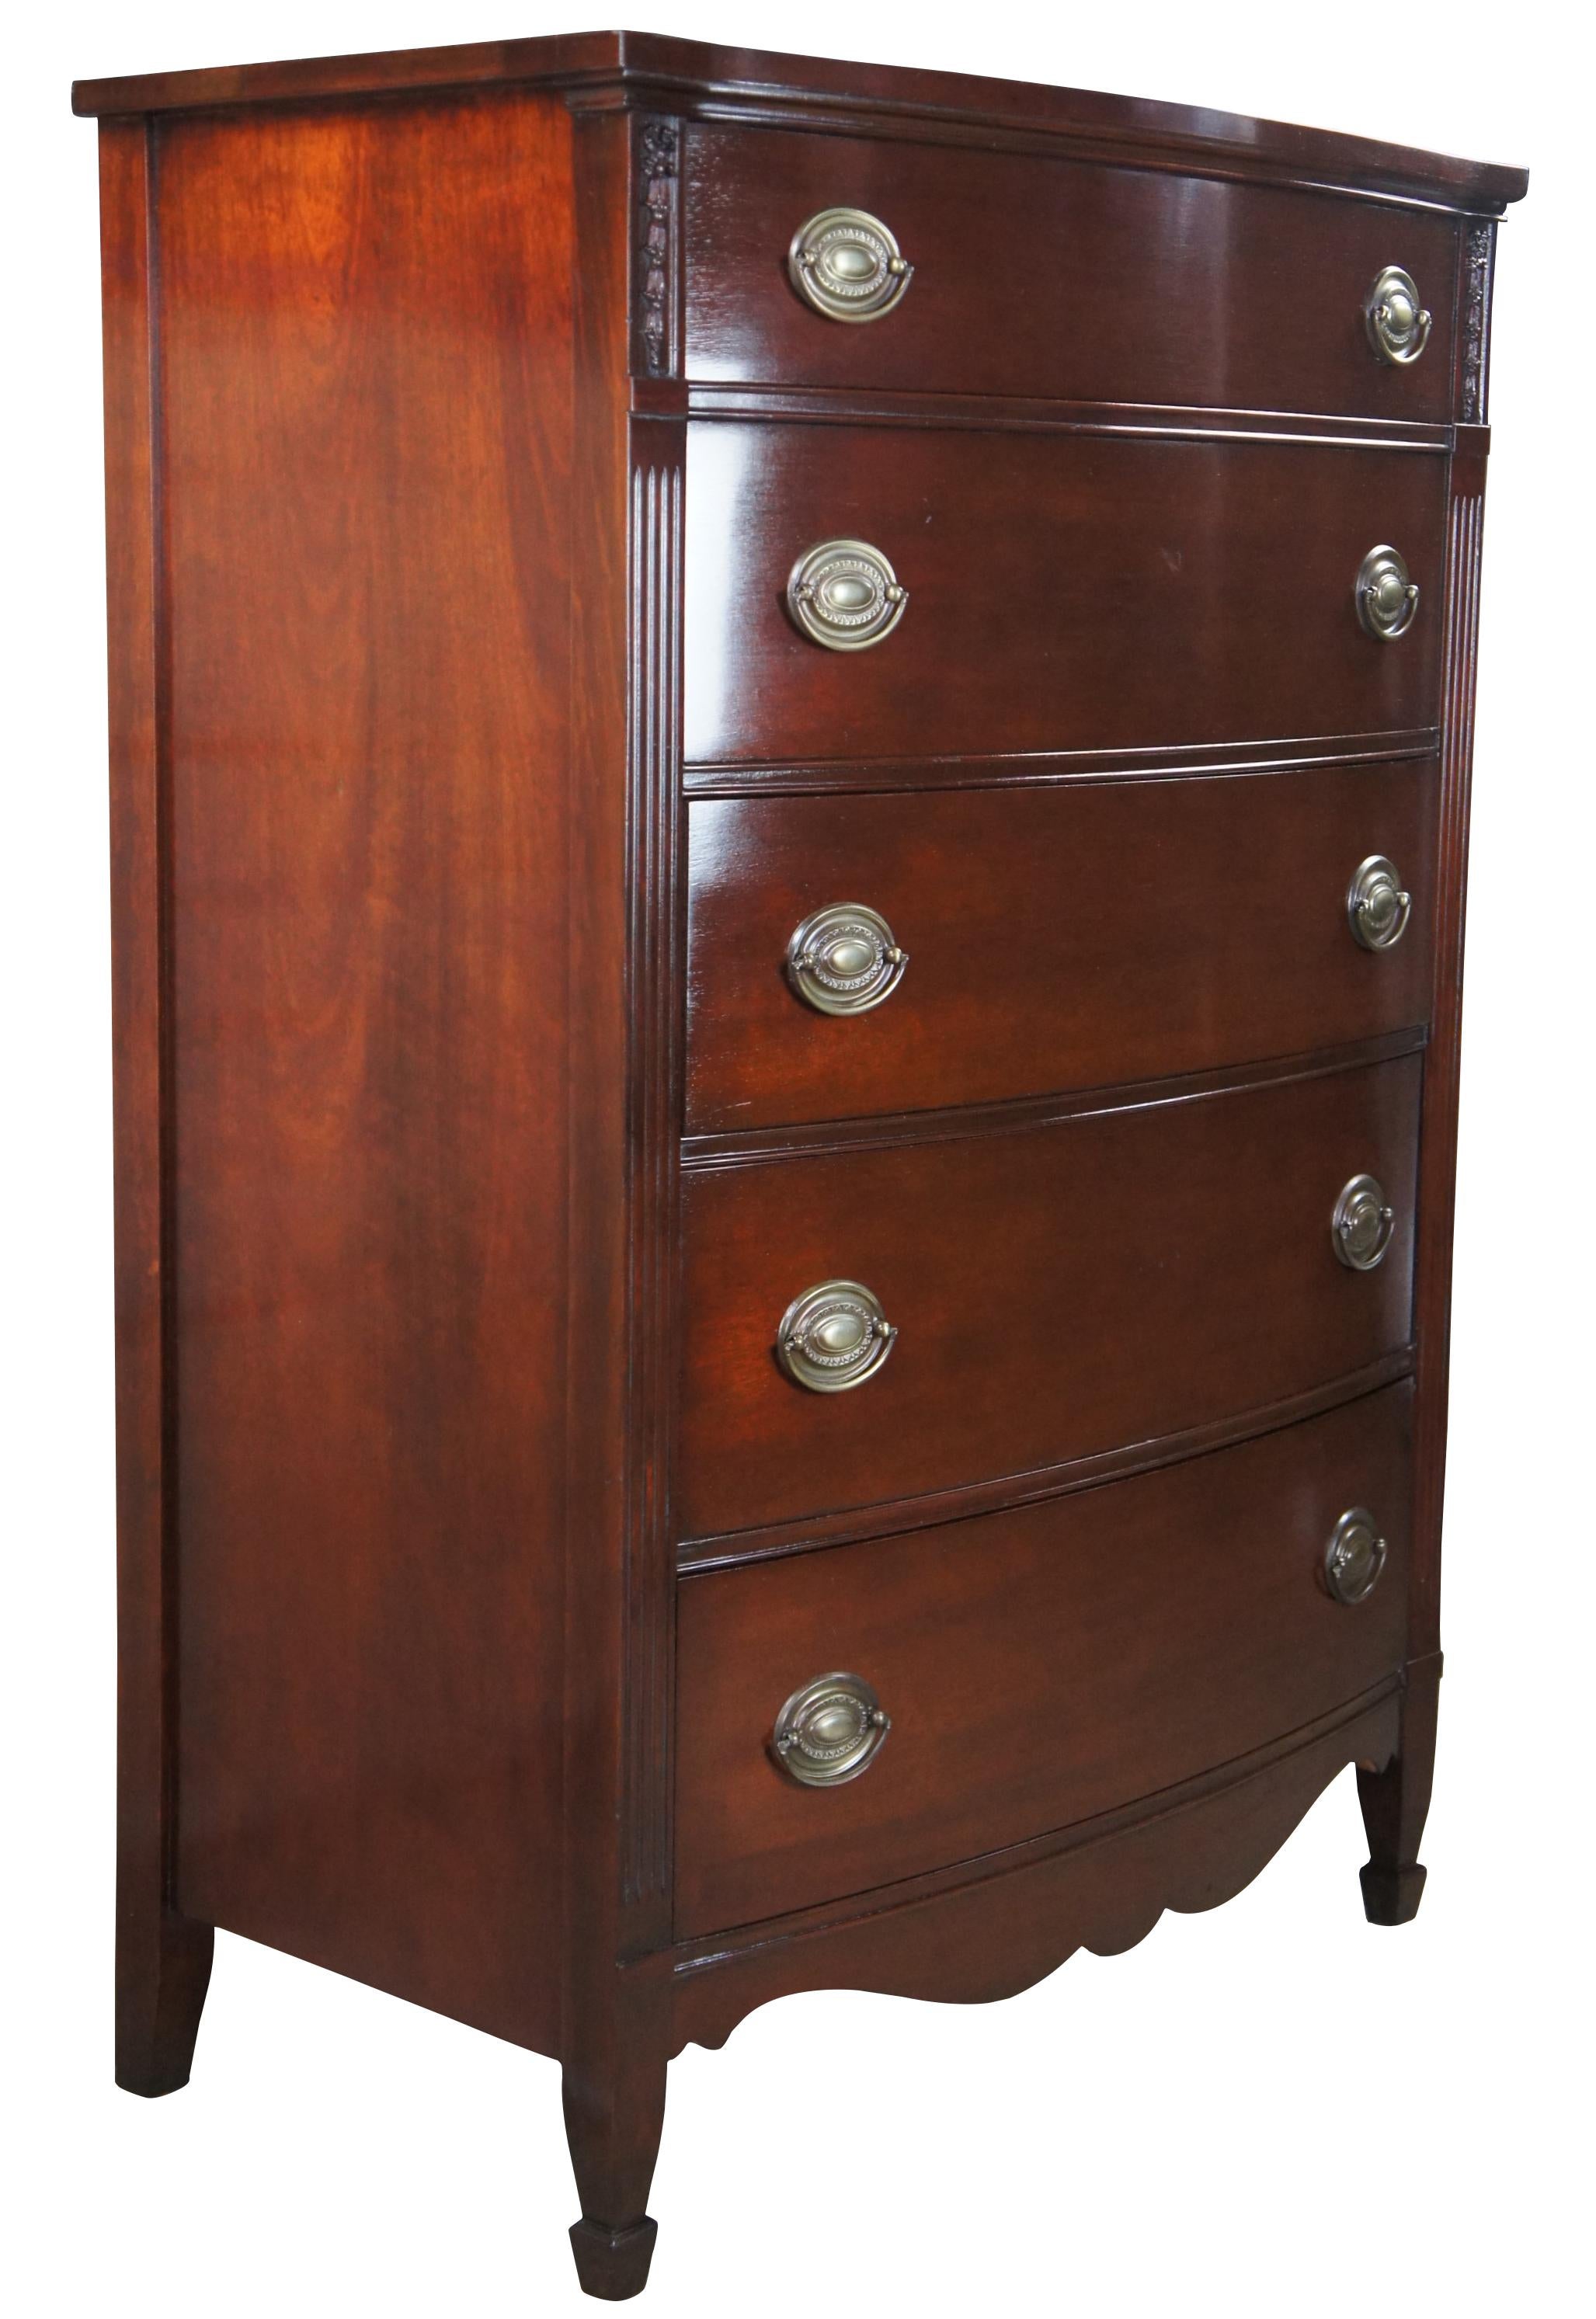 A beautiful Sheraton style tallboy dresser by Huntley Furniture, circa 1930s. Made from mahogany with a bow front. Includes 5 dovetailed drawers, oval brass hardware, carved foliate, and fluted stiles along the sides. The chest is supported by